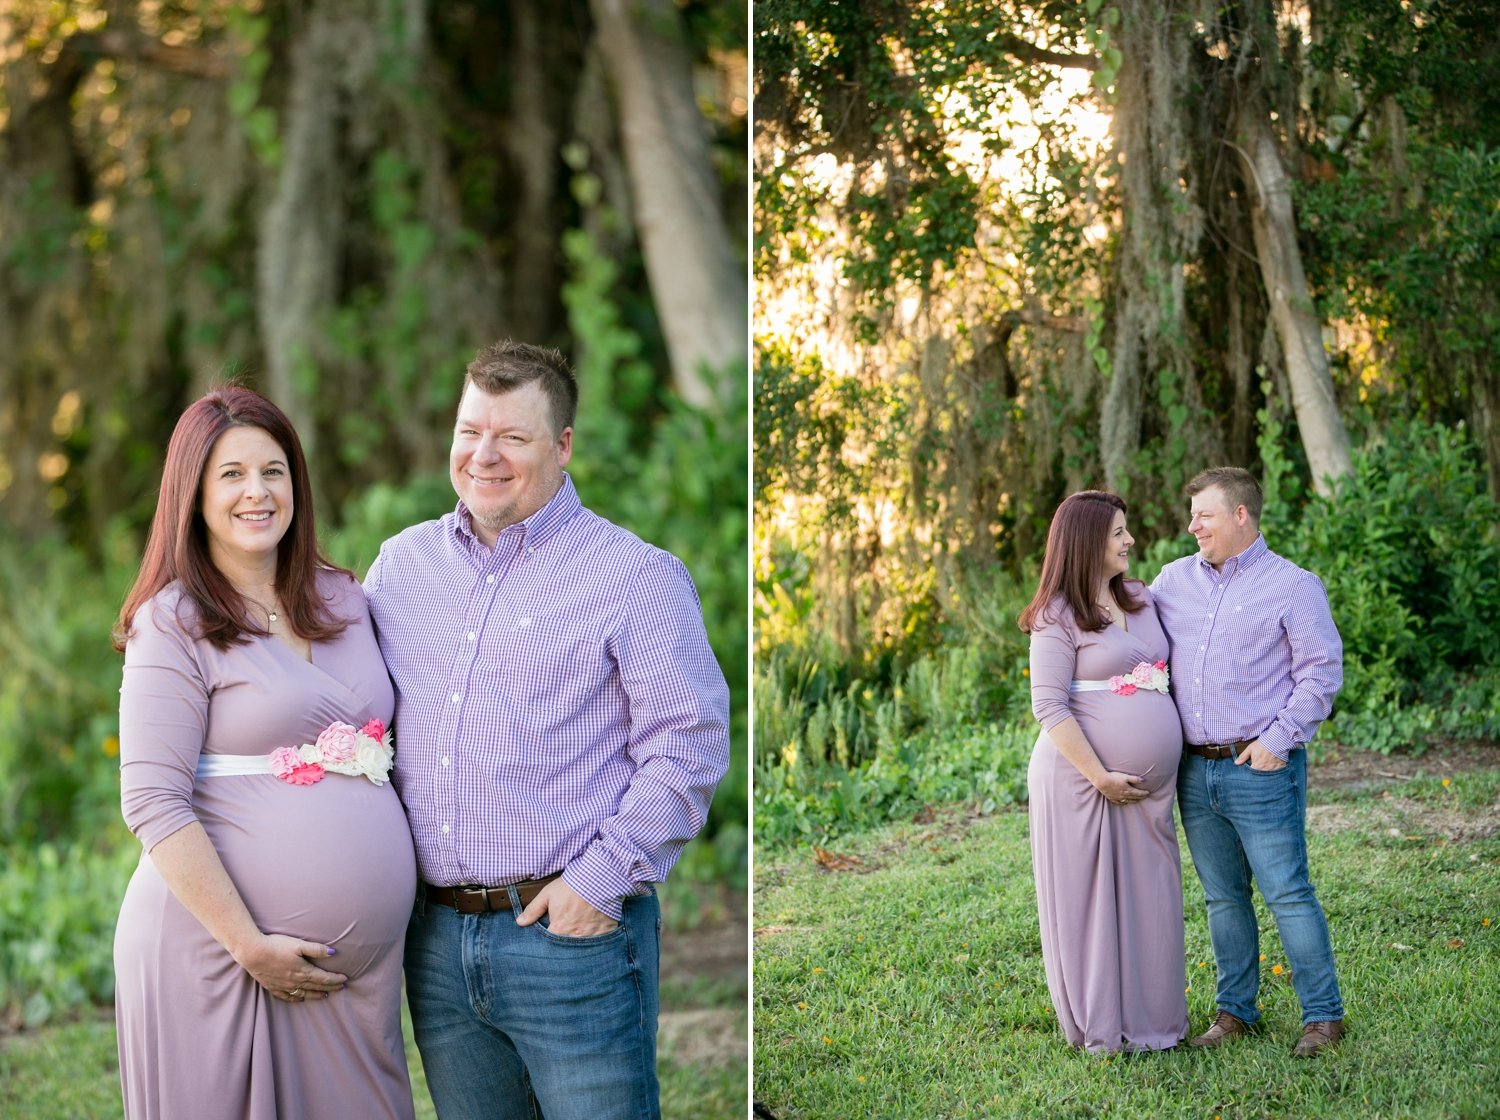 Tampa Maternity Session Carrie Wildes Photography Matt and Kim 1.jpg